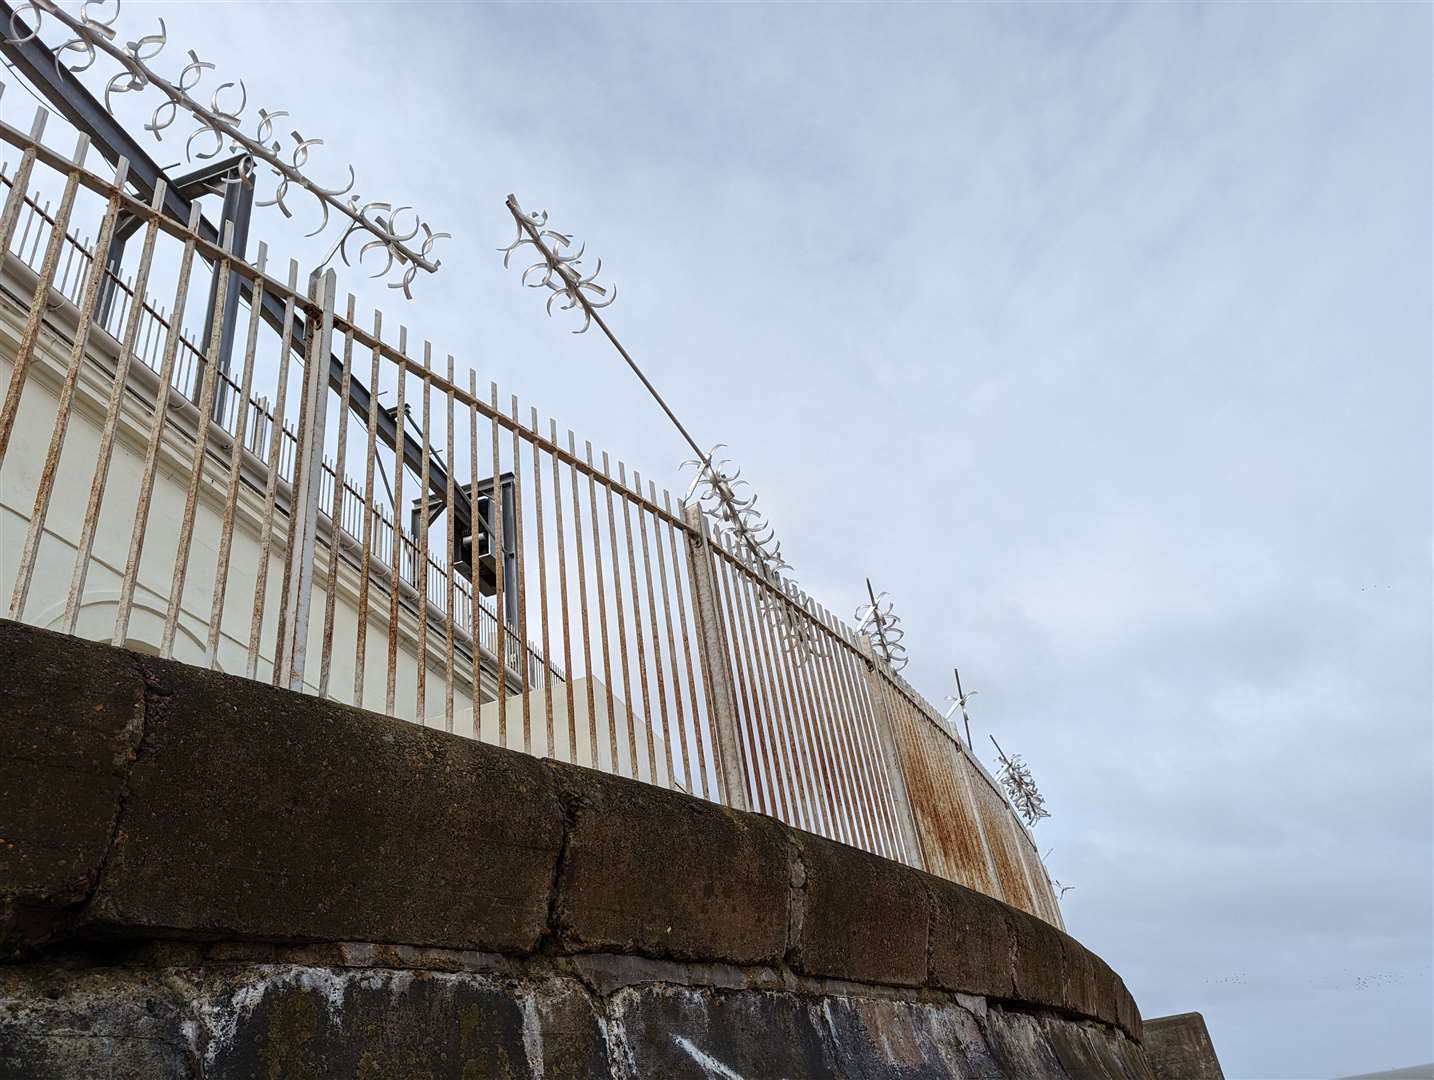 The piece of metal is thought to have fallen off the barb-topped wall surrounding Southern Water's Foreness Point pumping station in Margate